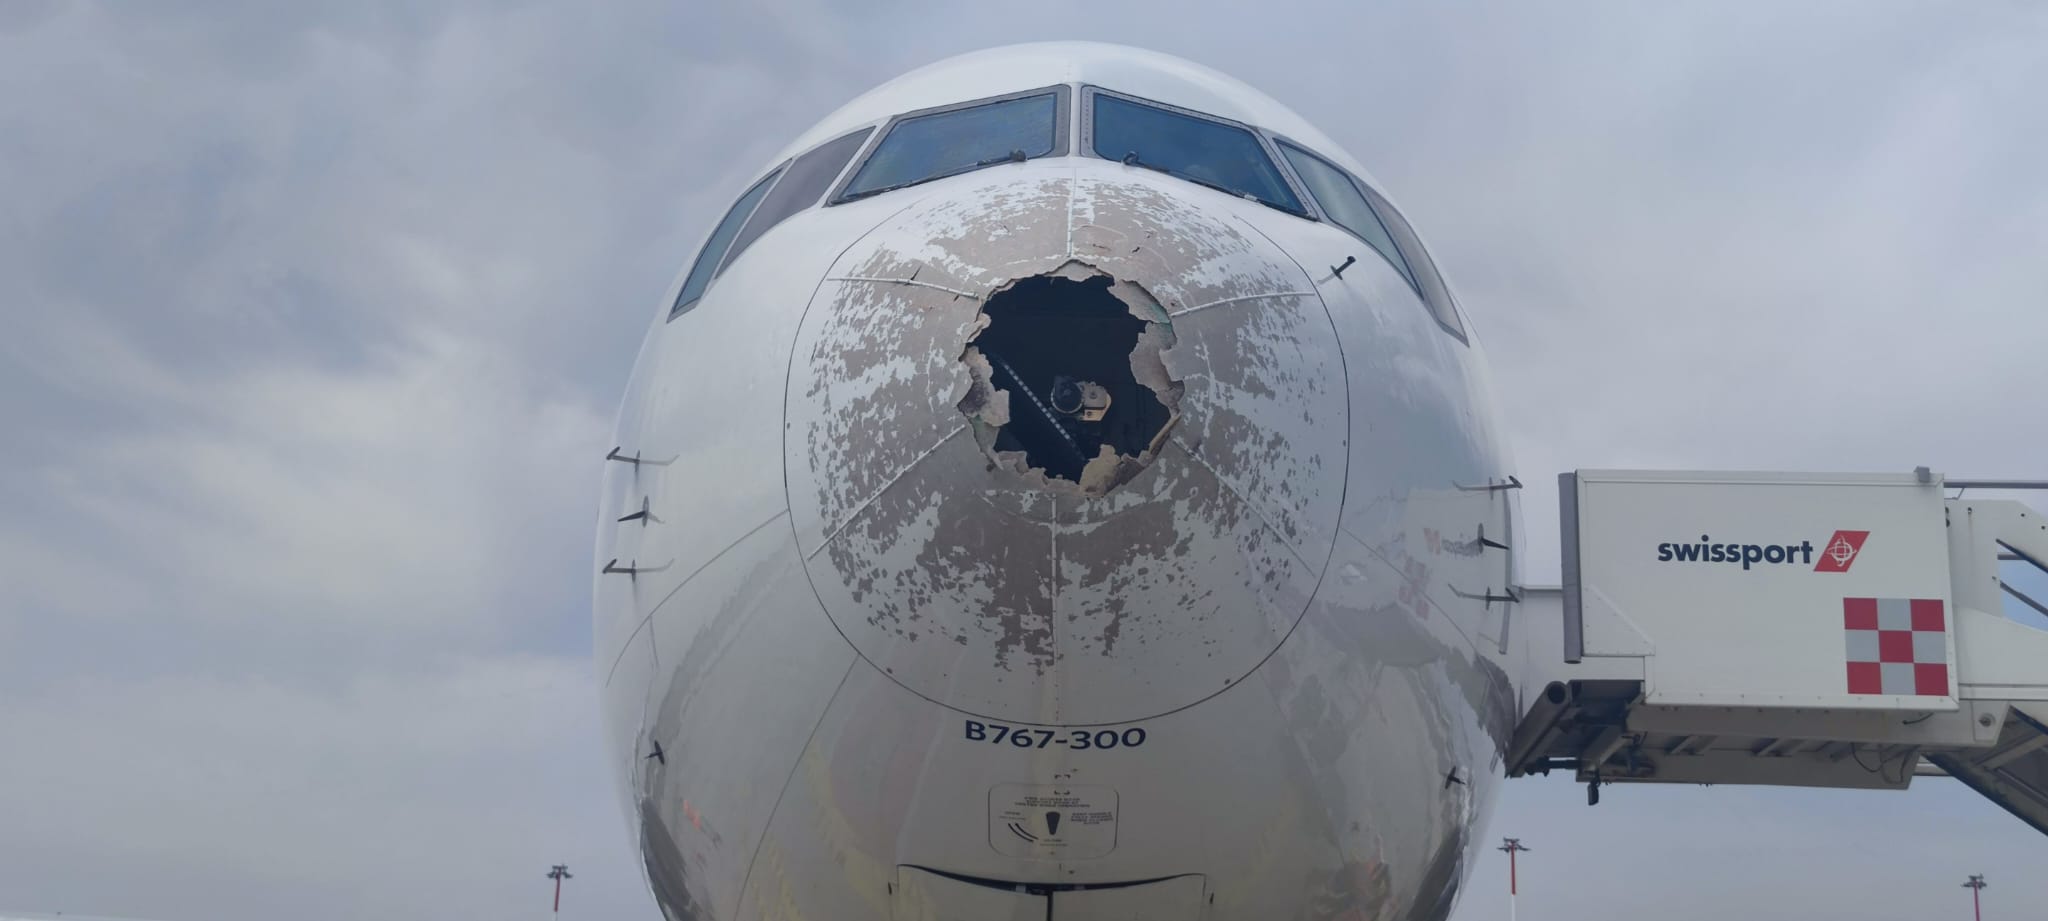 the front of a plane with a hole in it